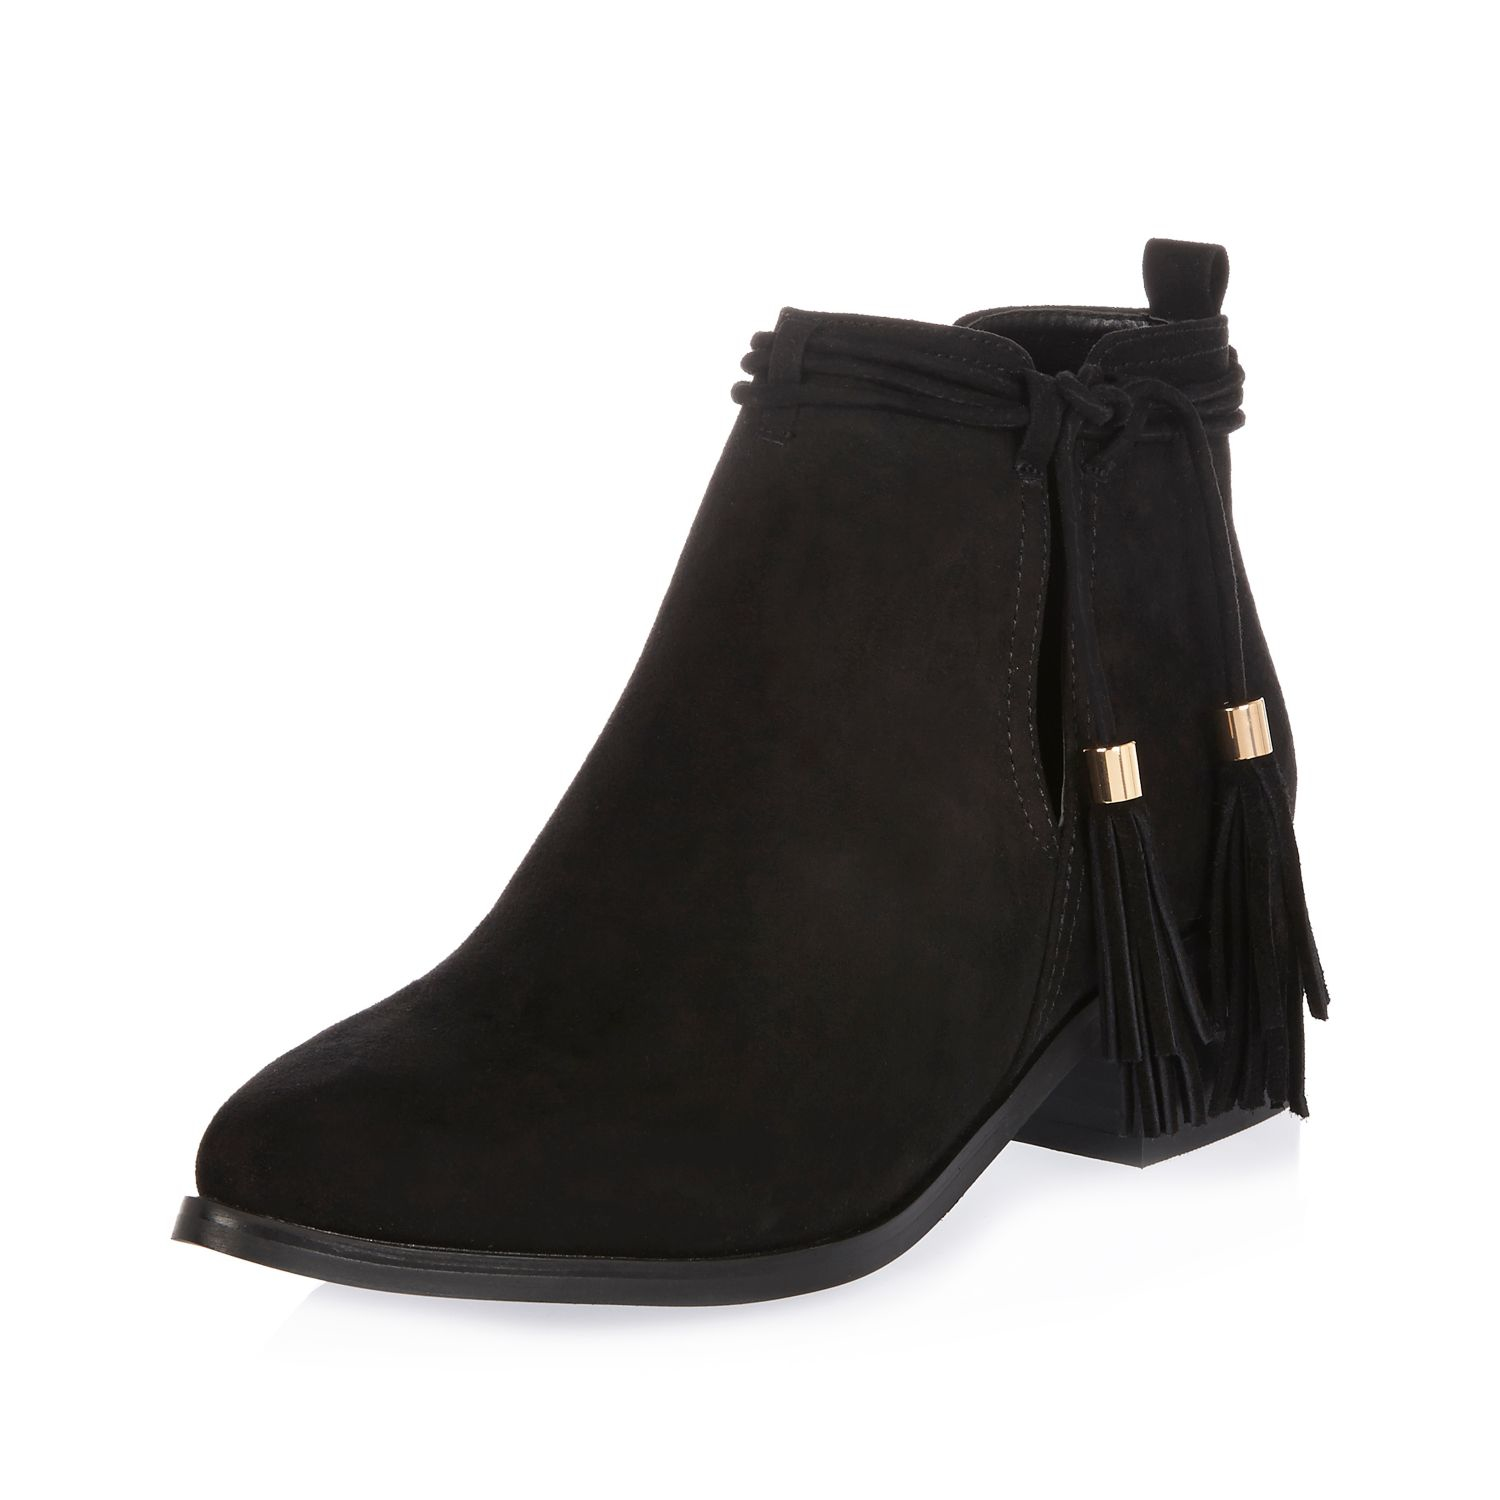 black boots with tassels